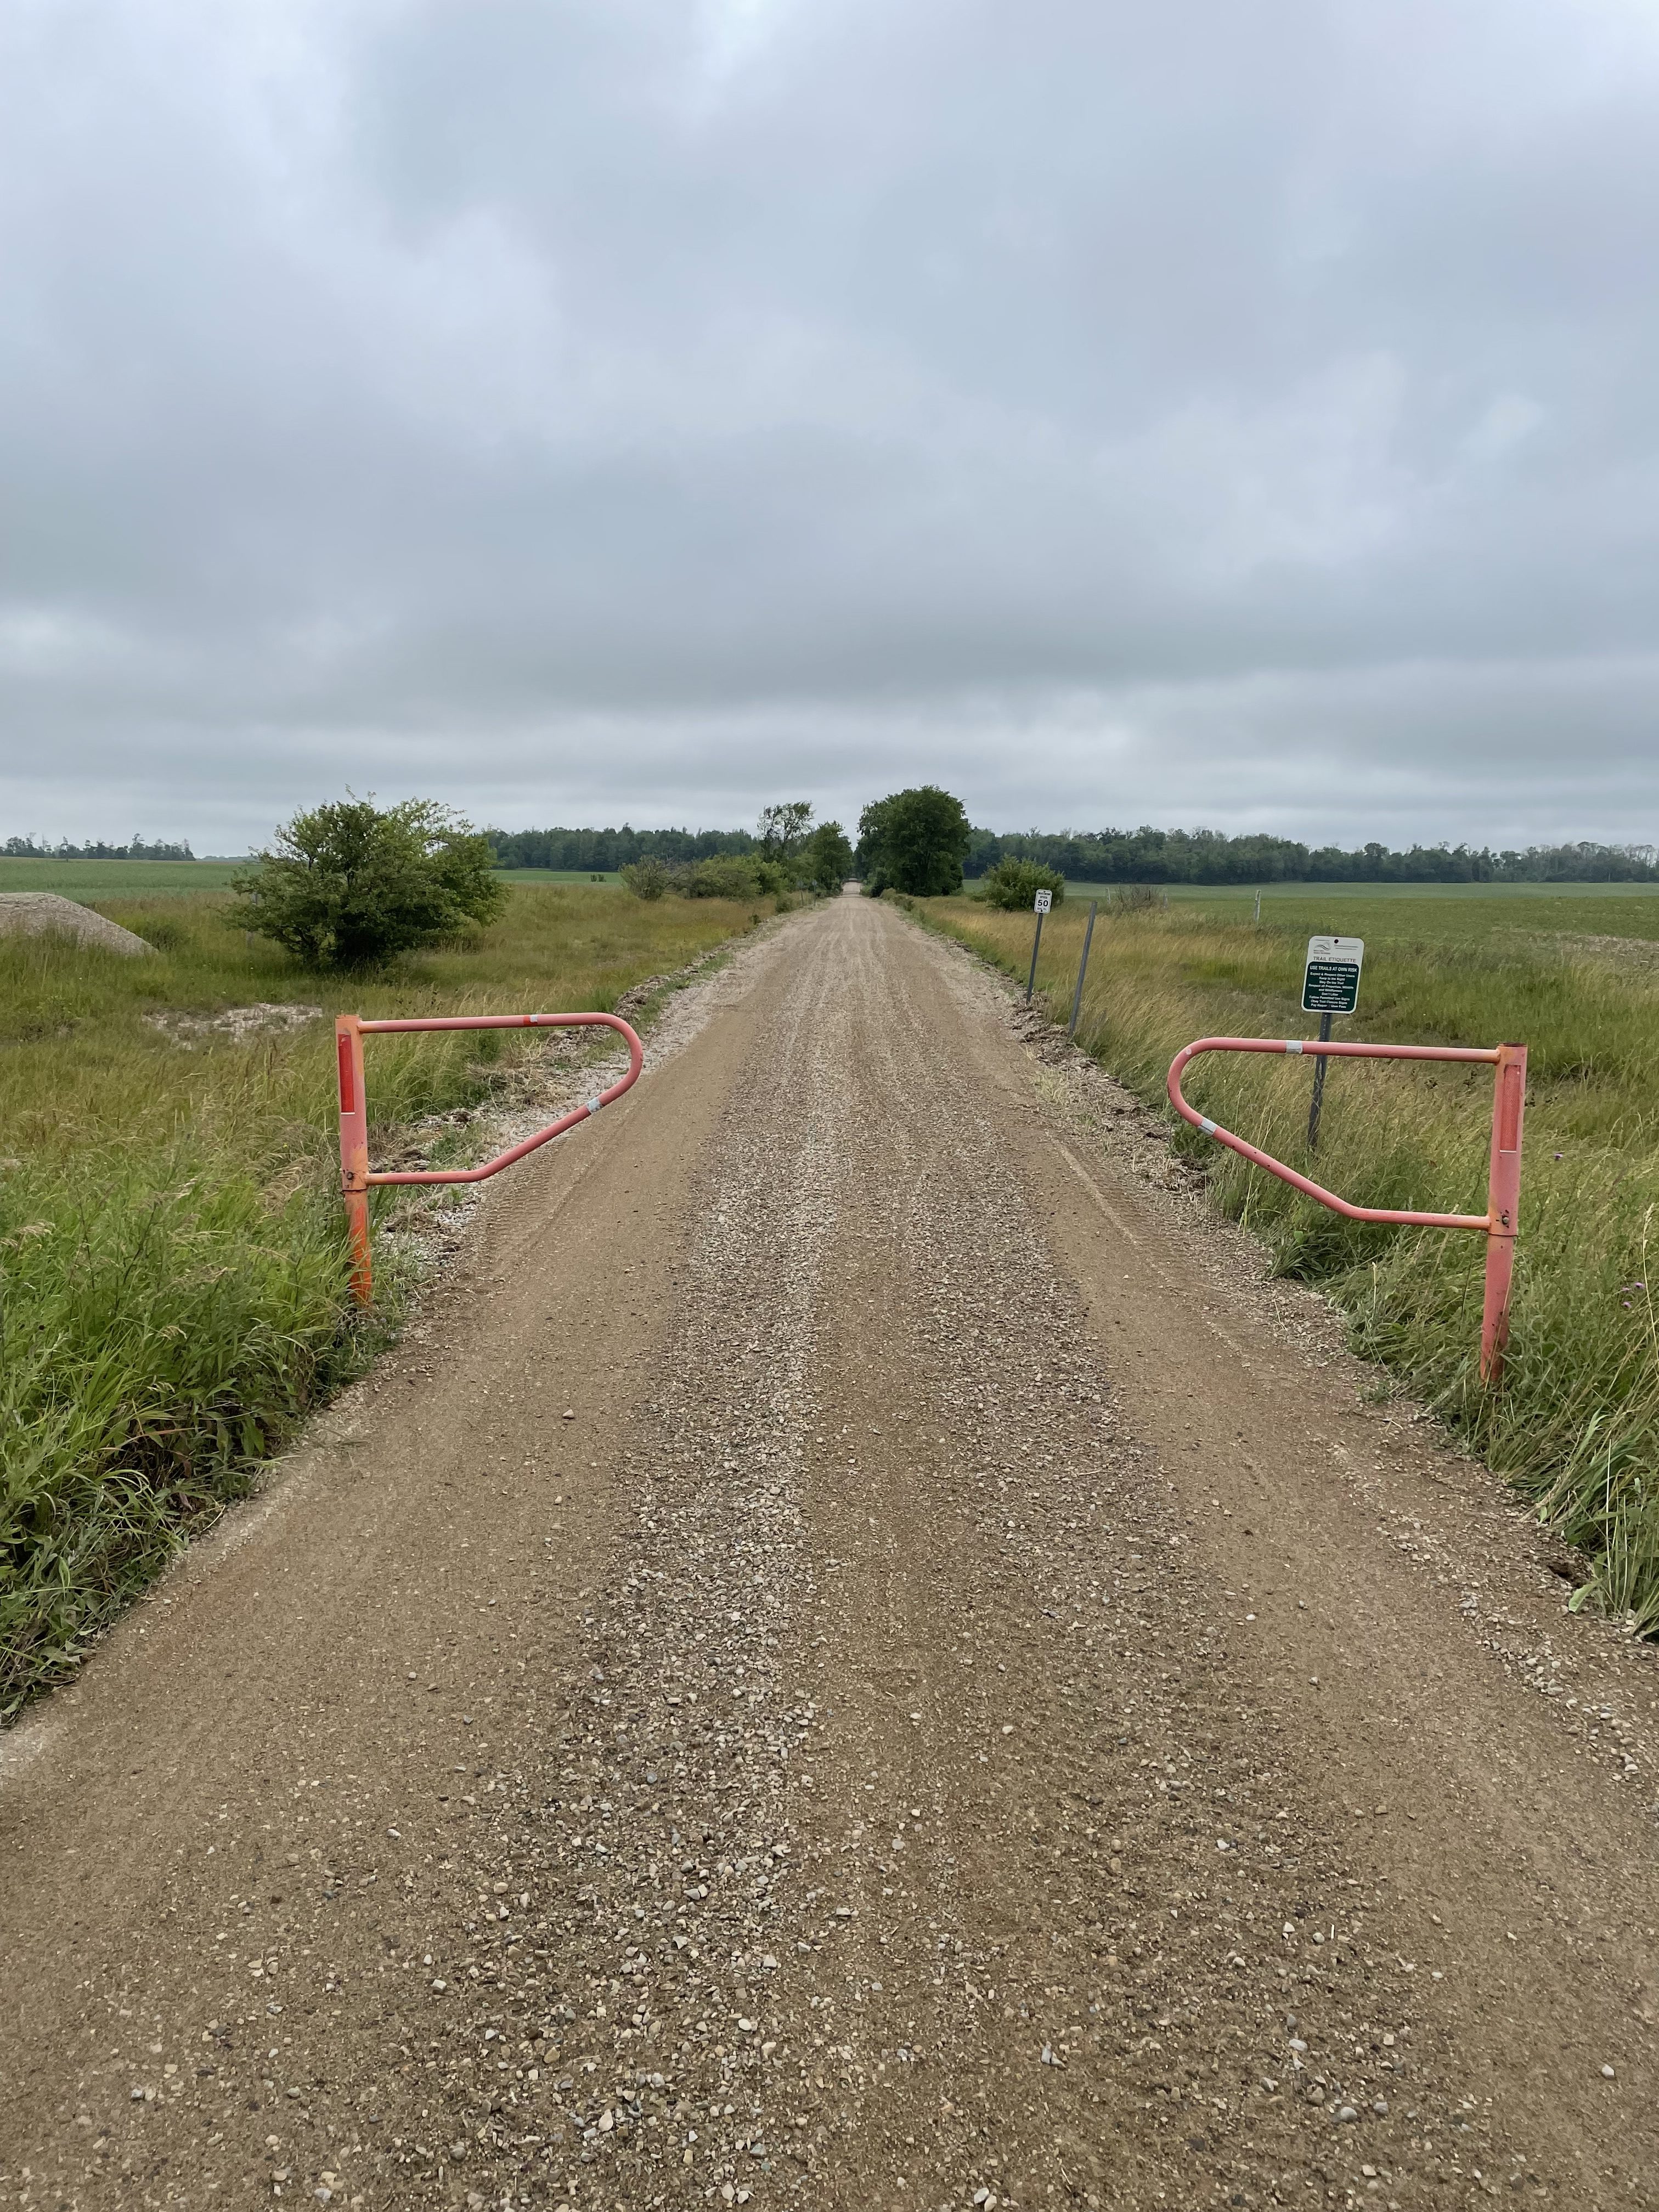 local rail trail to close for a week